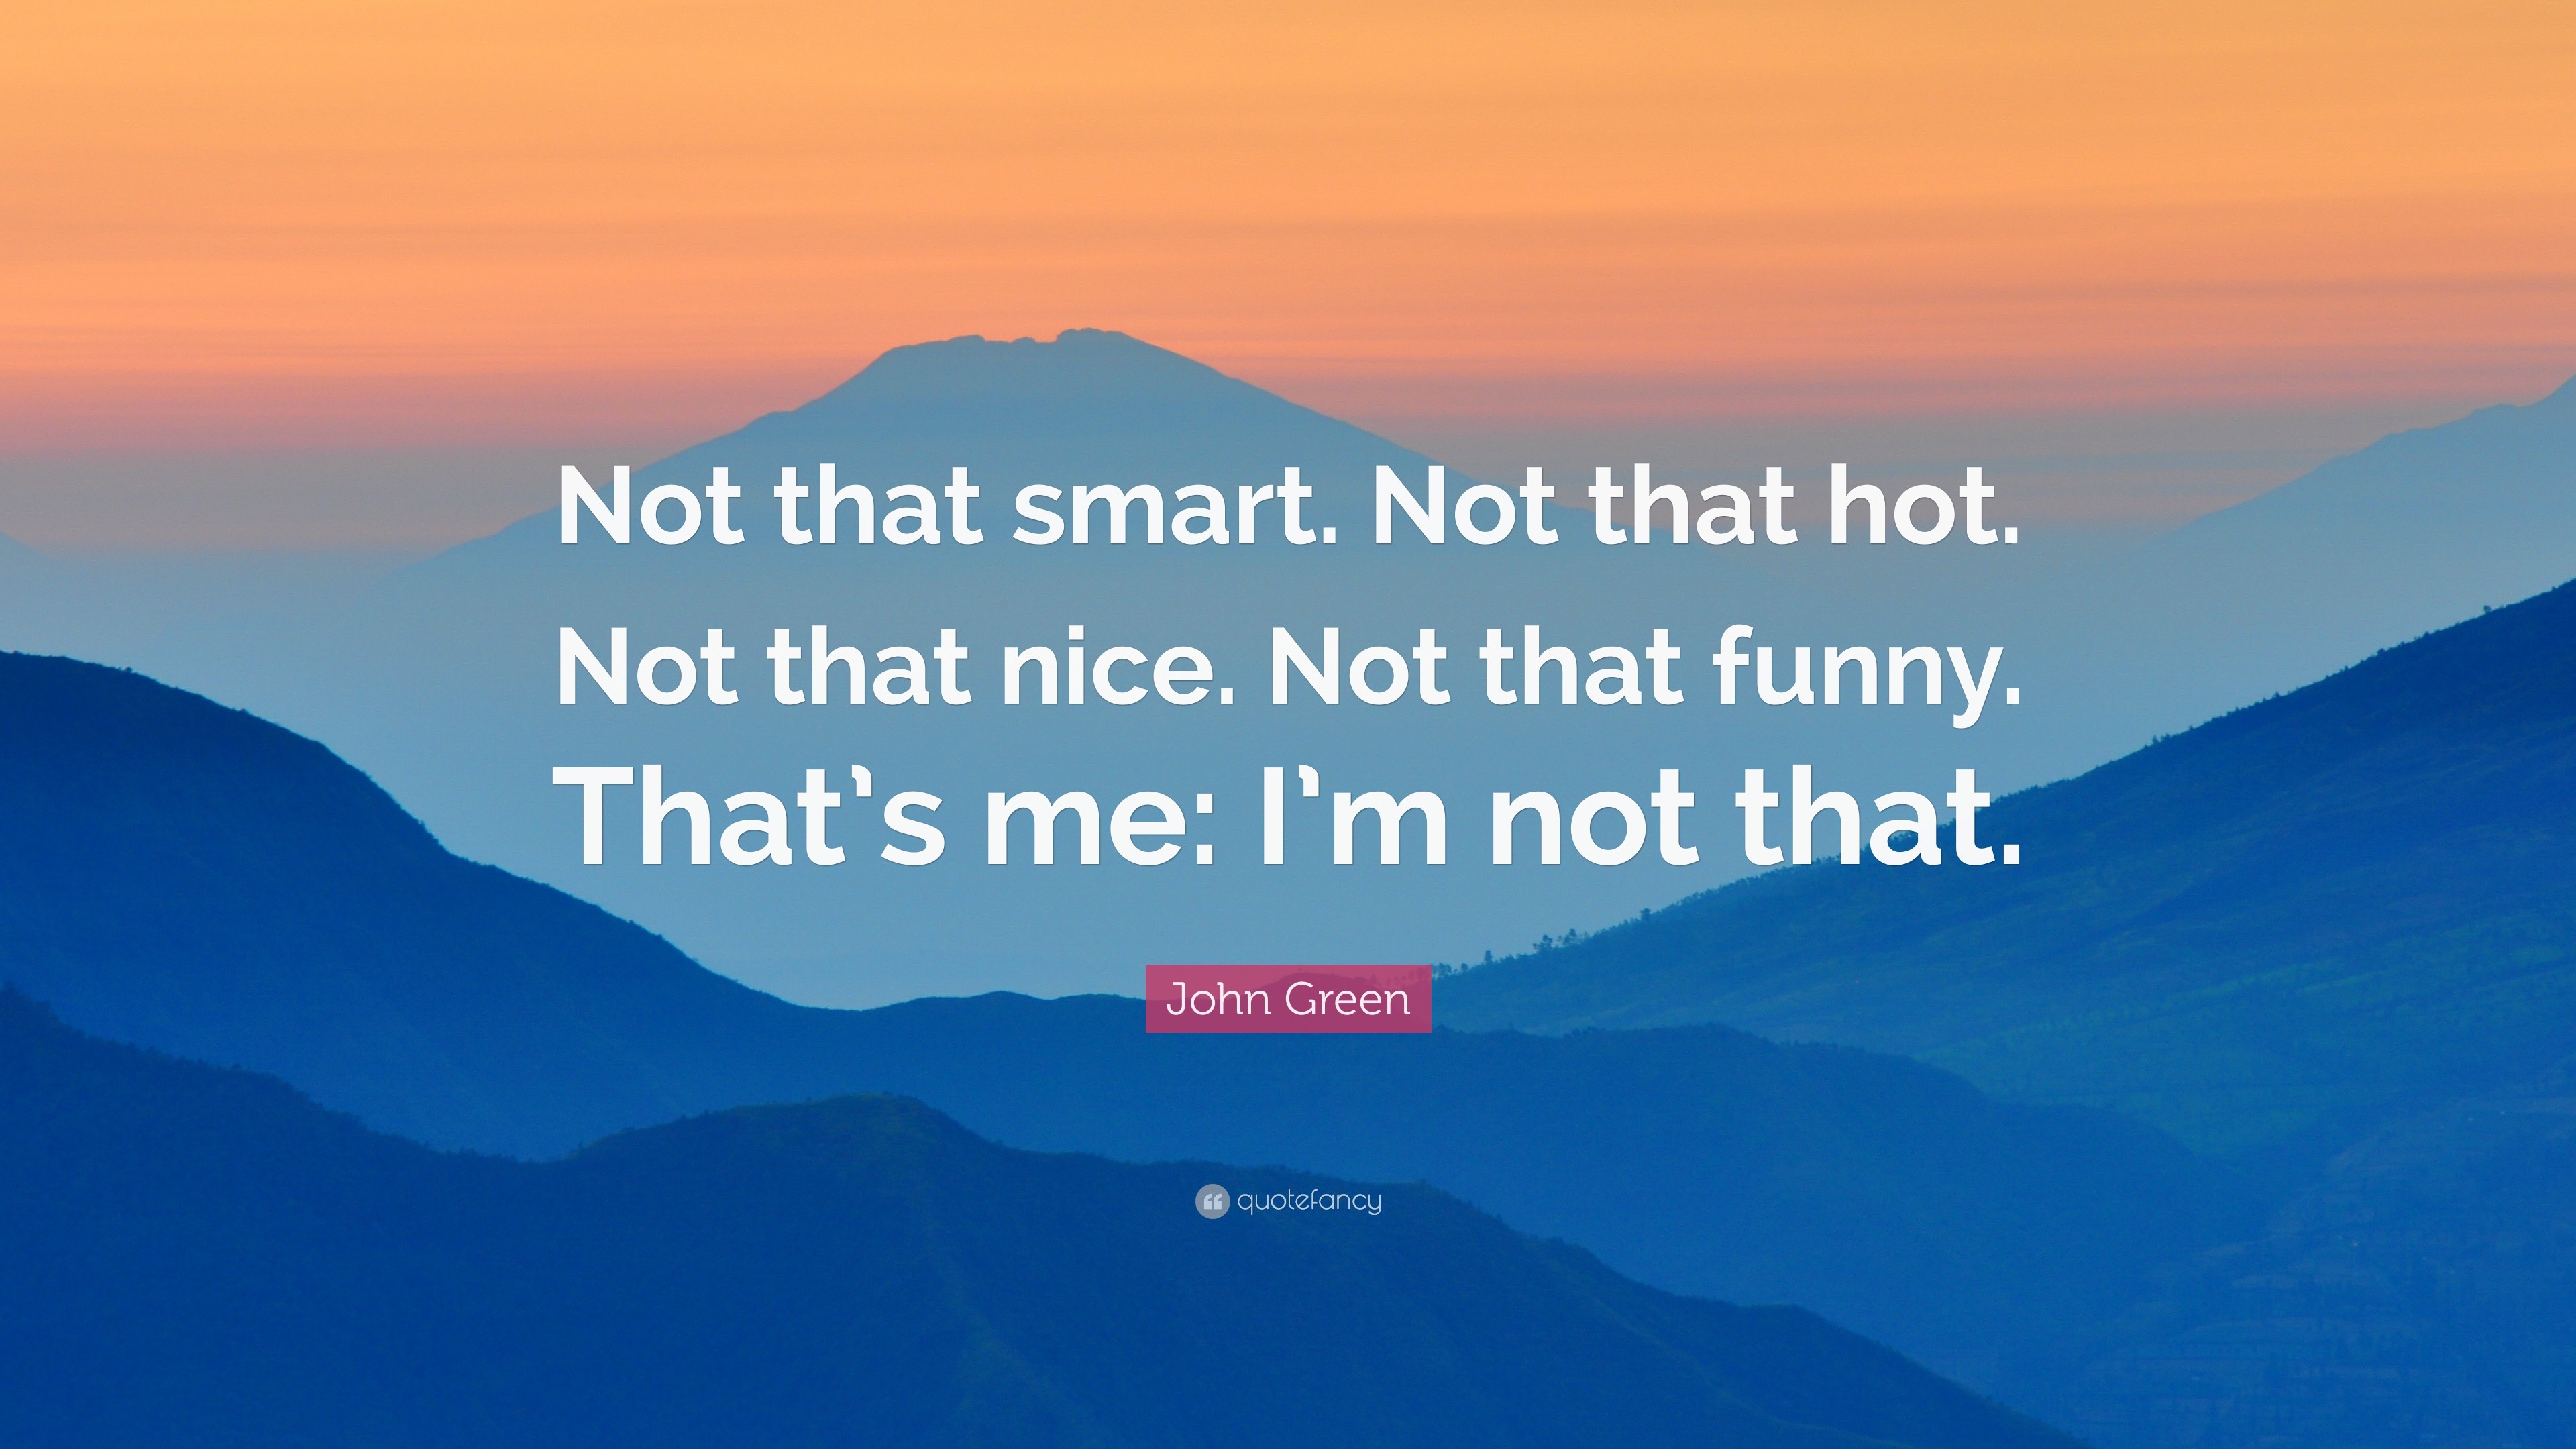 John Green Quote: “Not that smart. Not that hot. Not that nice. Not that  funny. That's